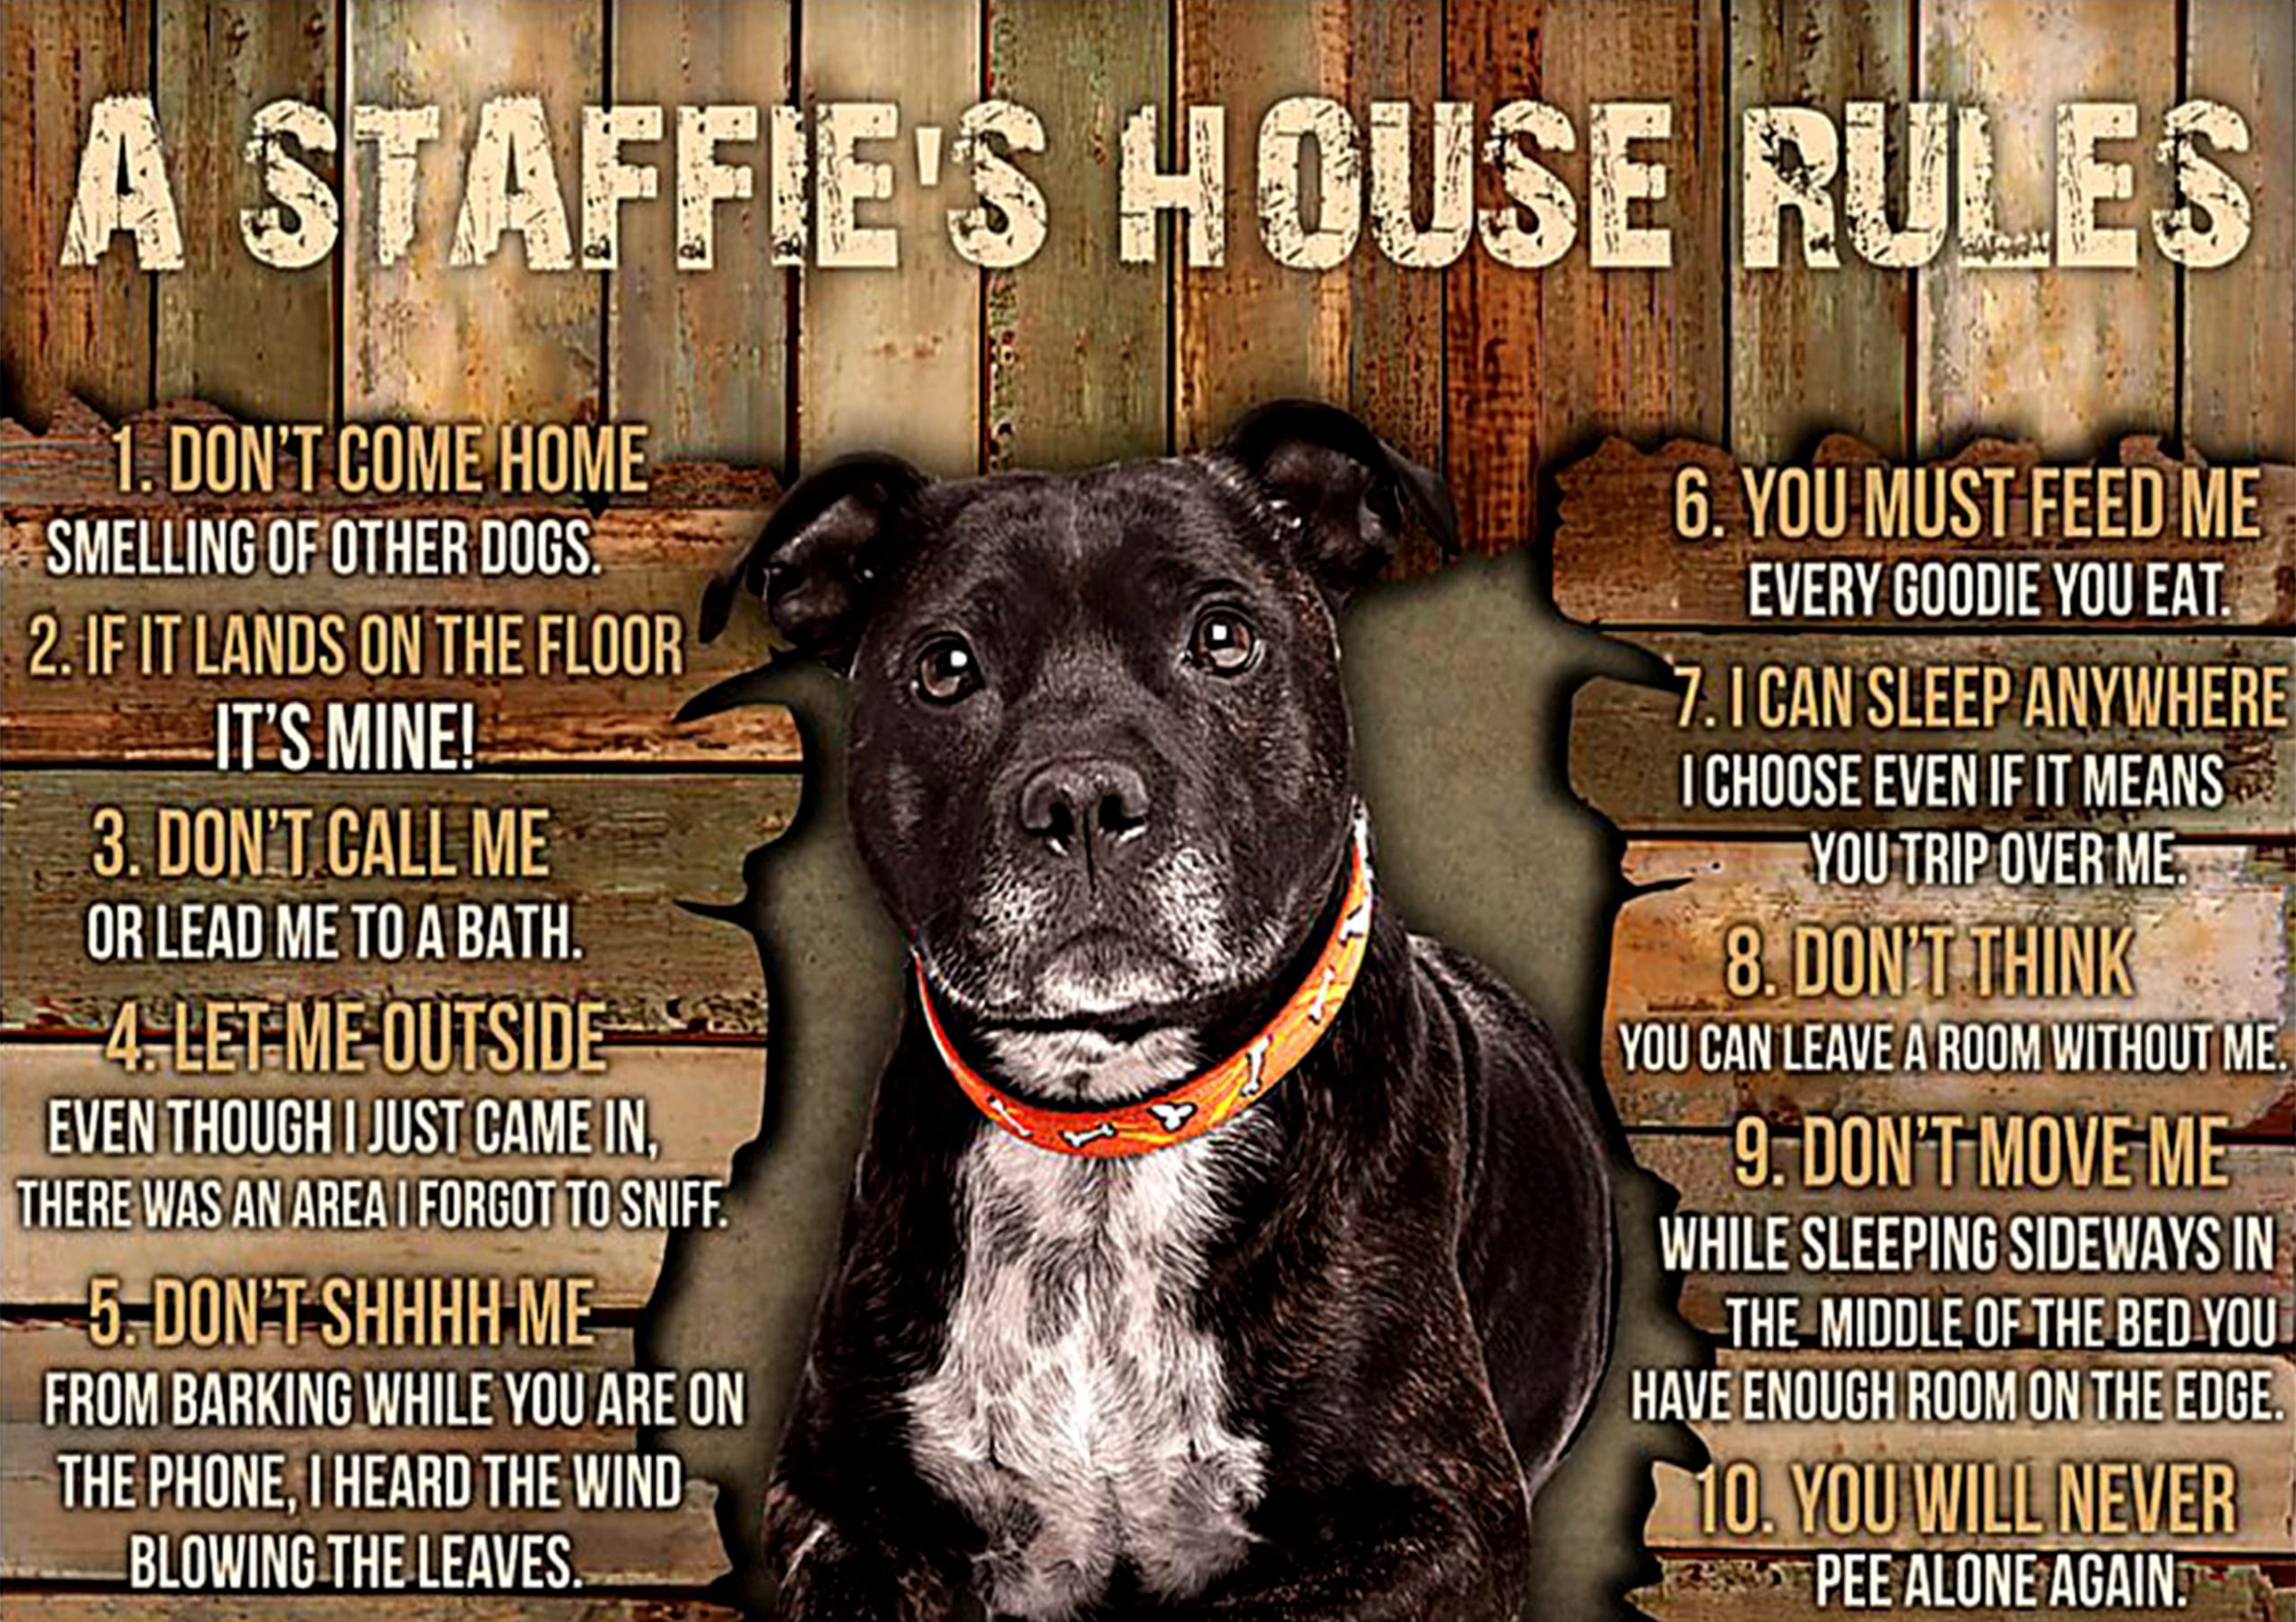 dog lover a staffies house rules poster 1 - Copy